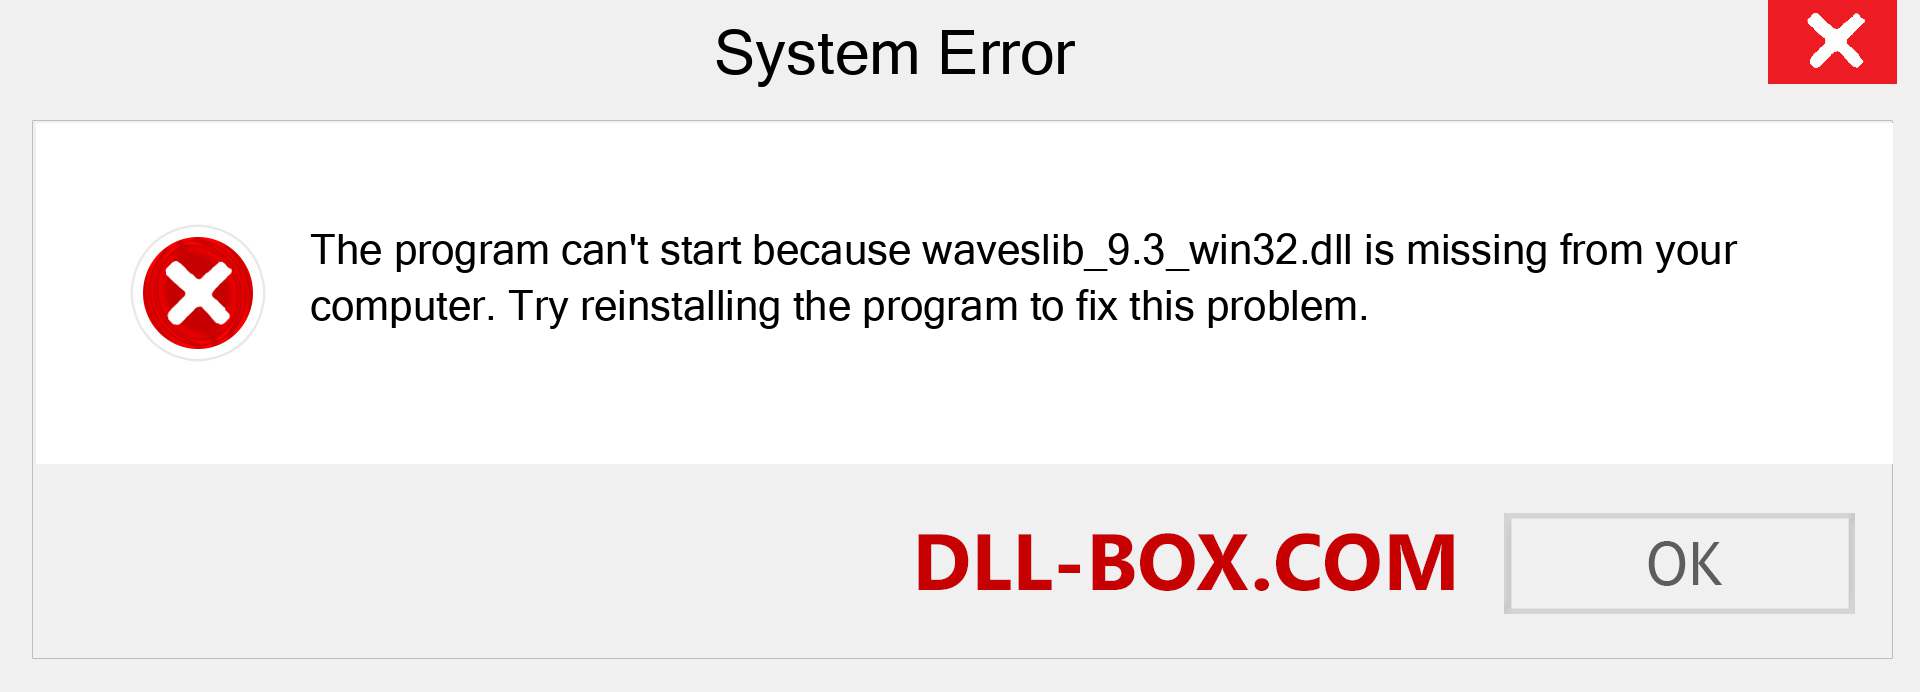  waveslib_9.3_win32.dll file is missing?. Download for Windows 7, 8, 10 - Fix  waveslib_9.3_win32 dll Missing Error on Windows, photos, images